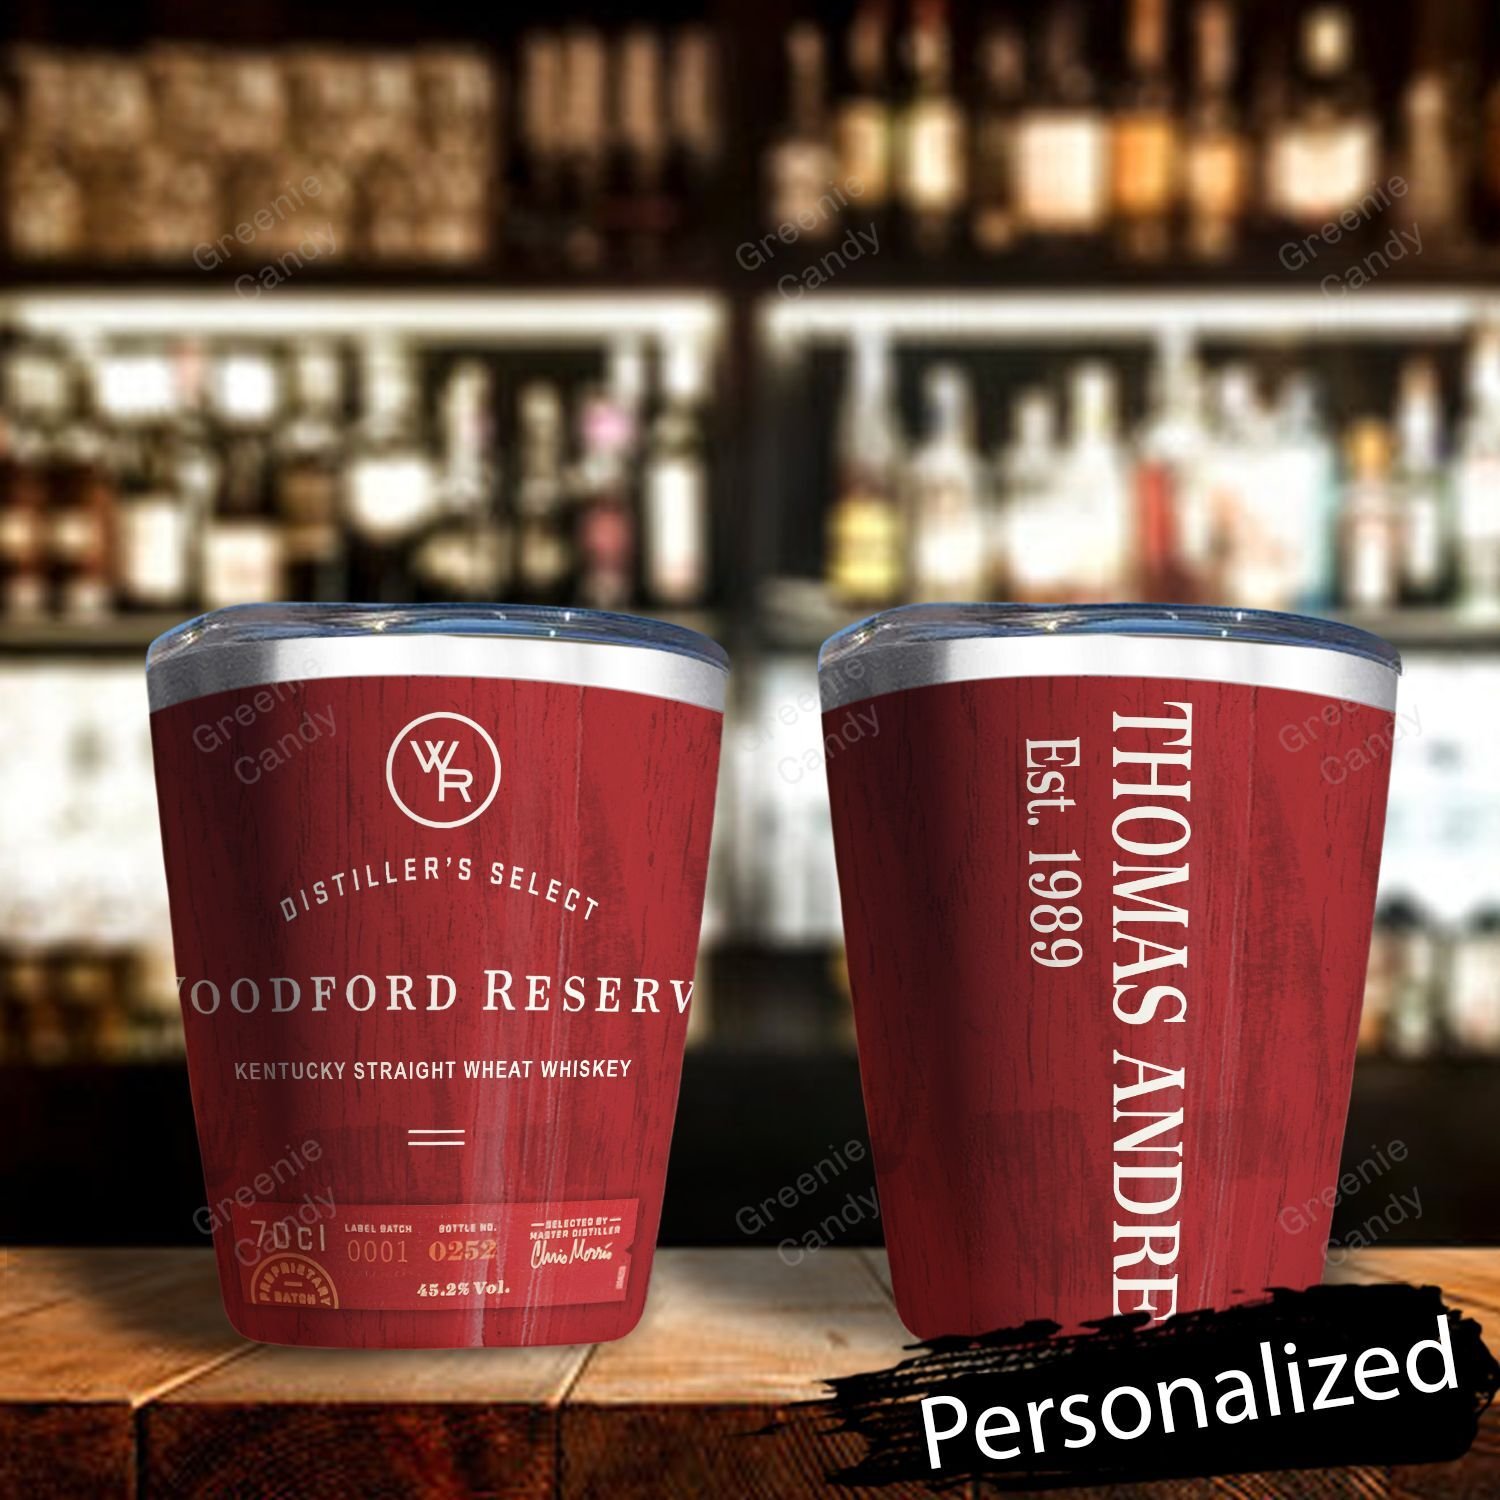 Personalized_Woodford_Reserve_Whiskey_Tumbler_1